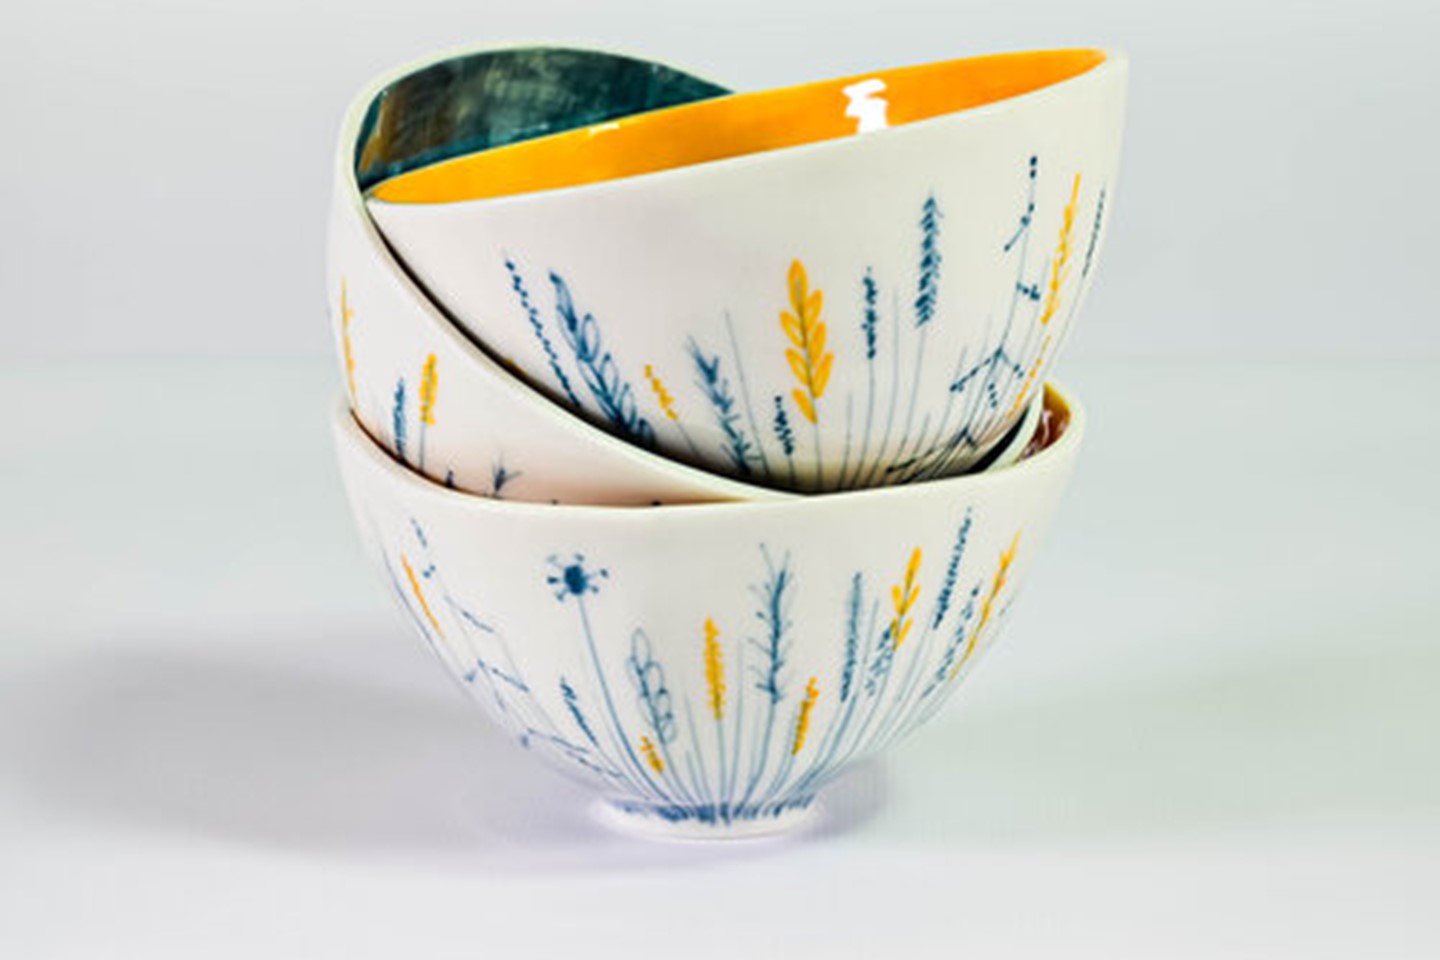 Photo of ceramic bowls, hand painted and decorated with yellow and blue leaves